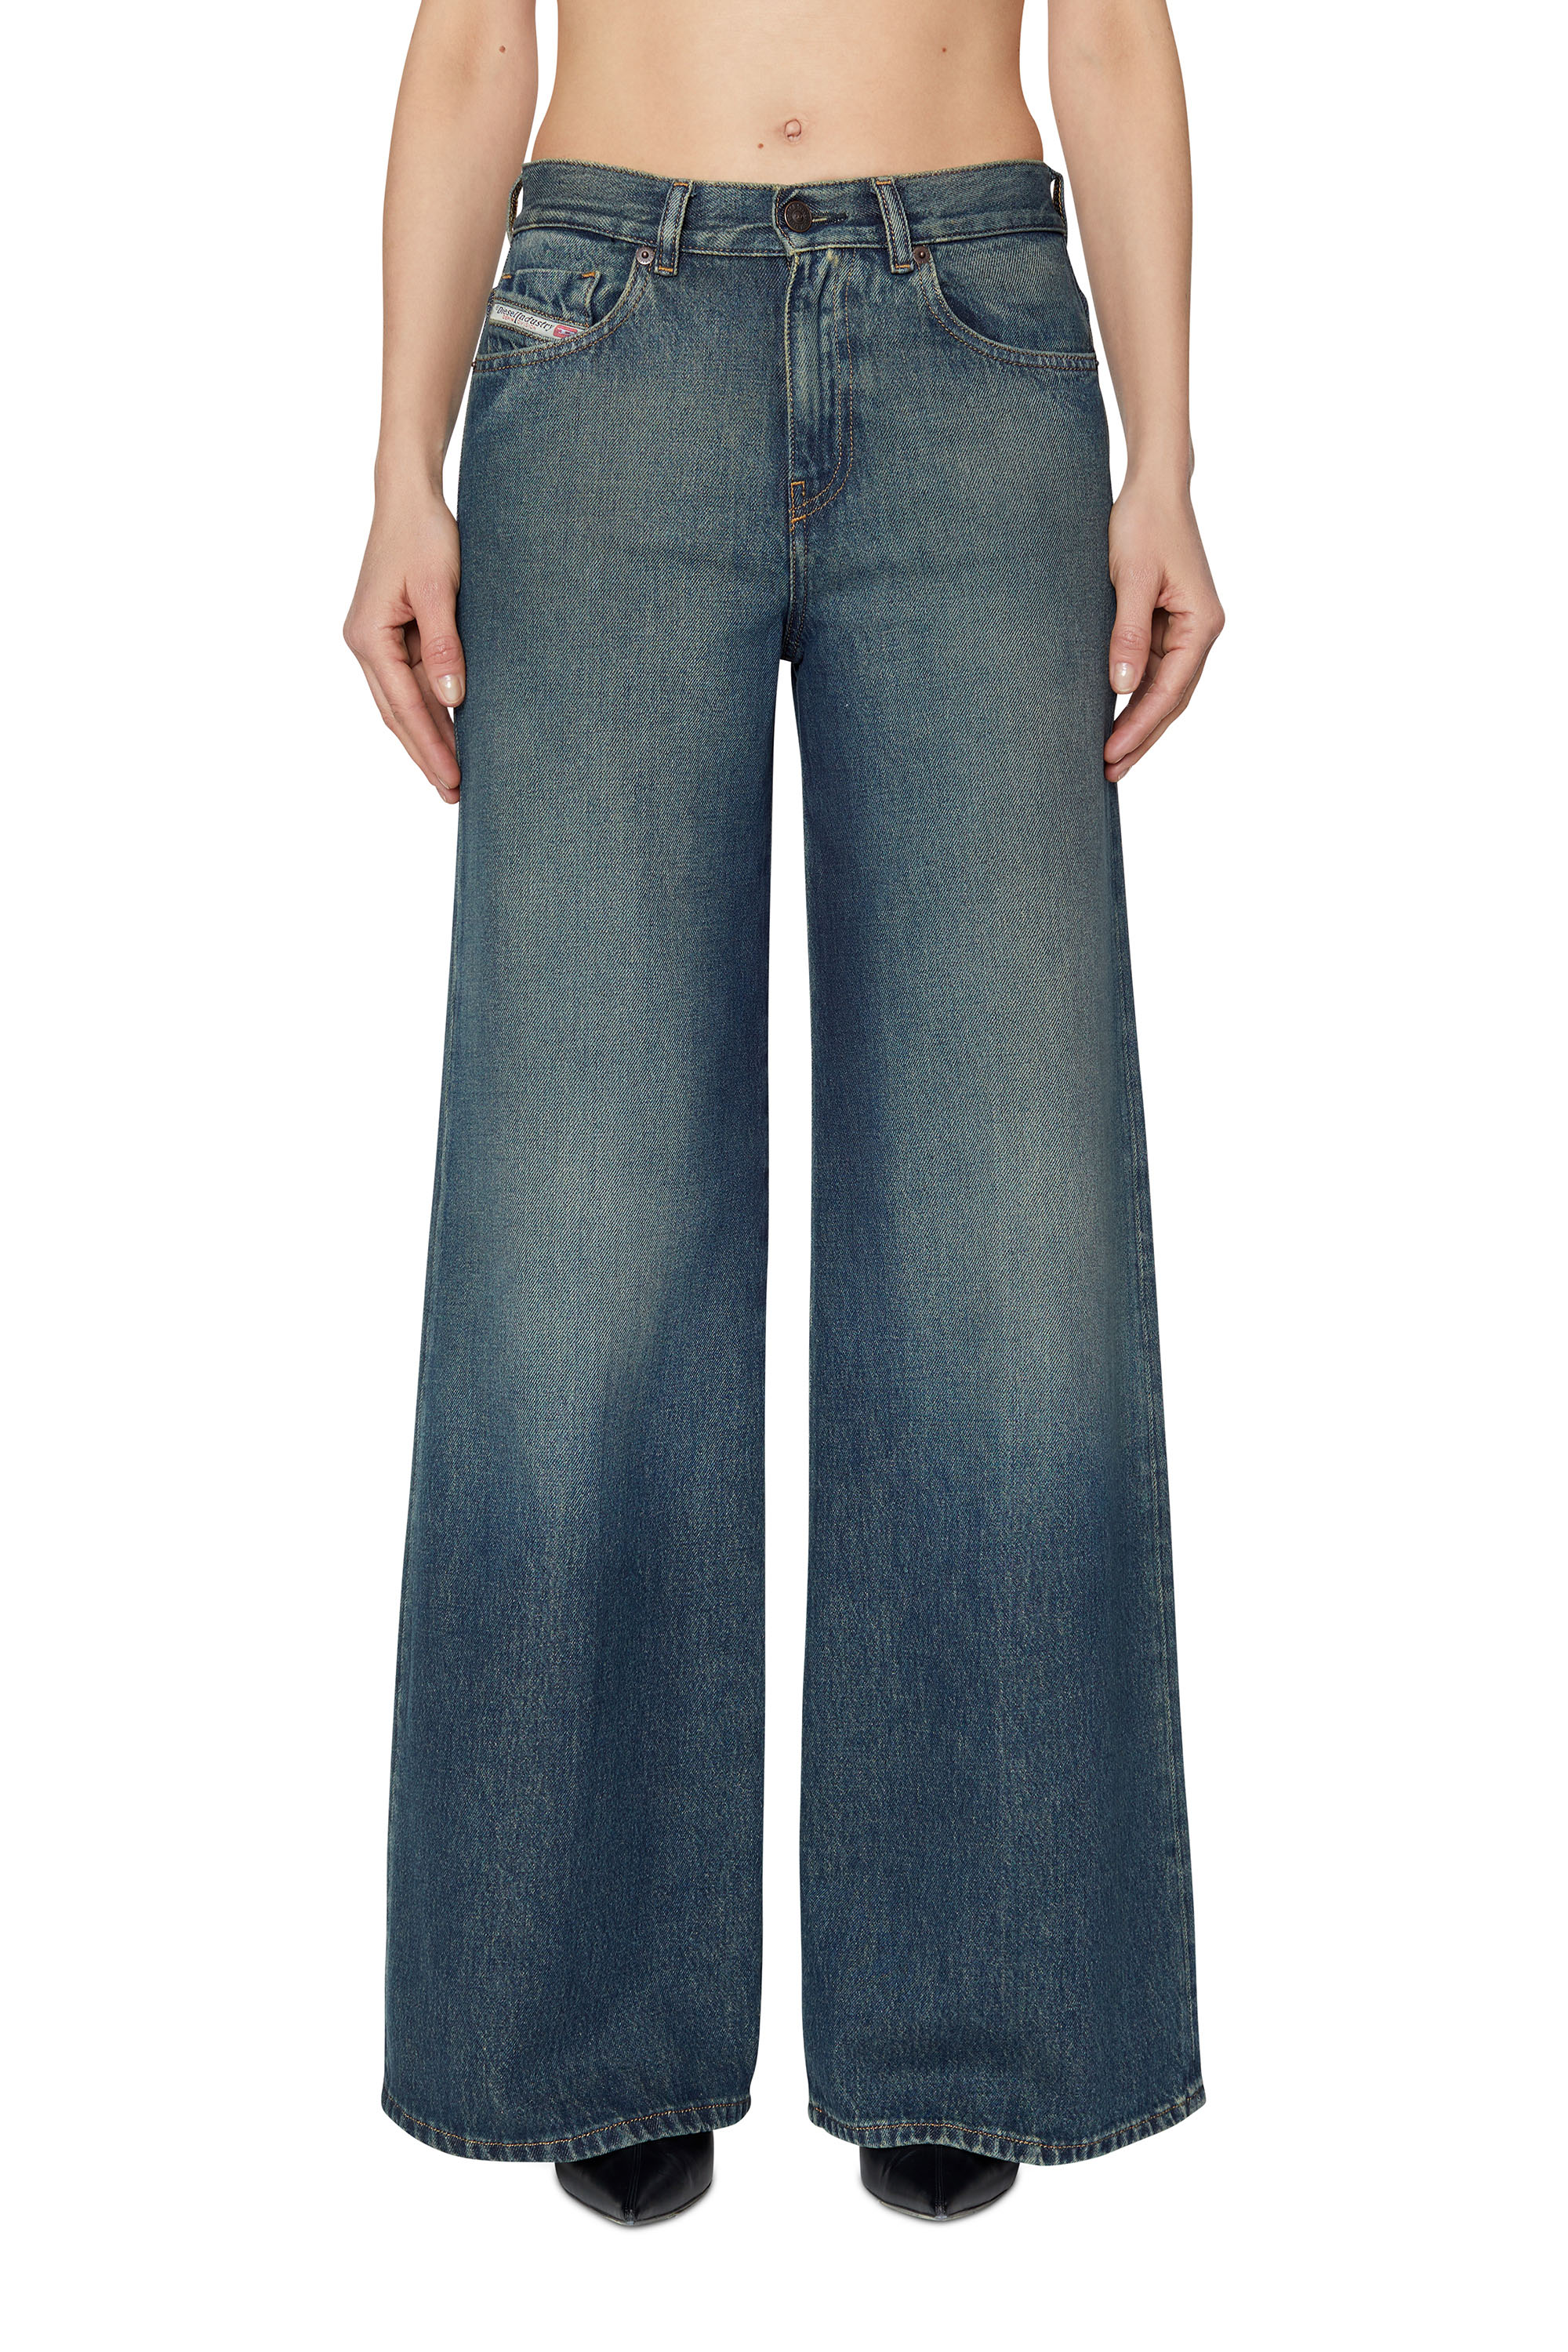 1978 D-AKEMI 09C04 Bootcut and Flare Jeans, Azul Oscuro - Vaqueros